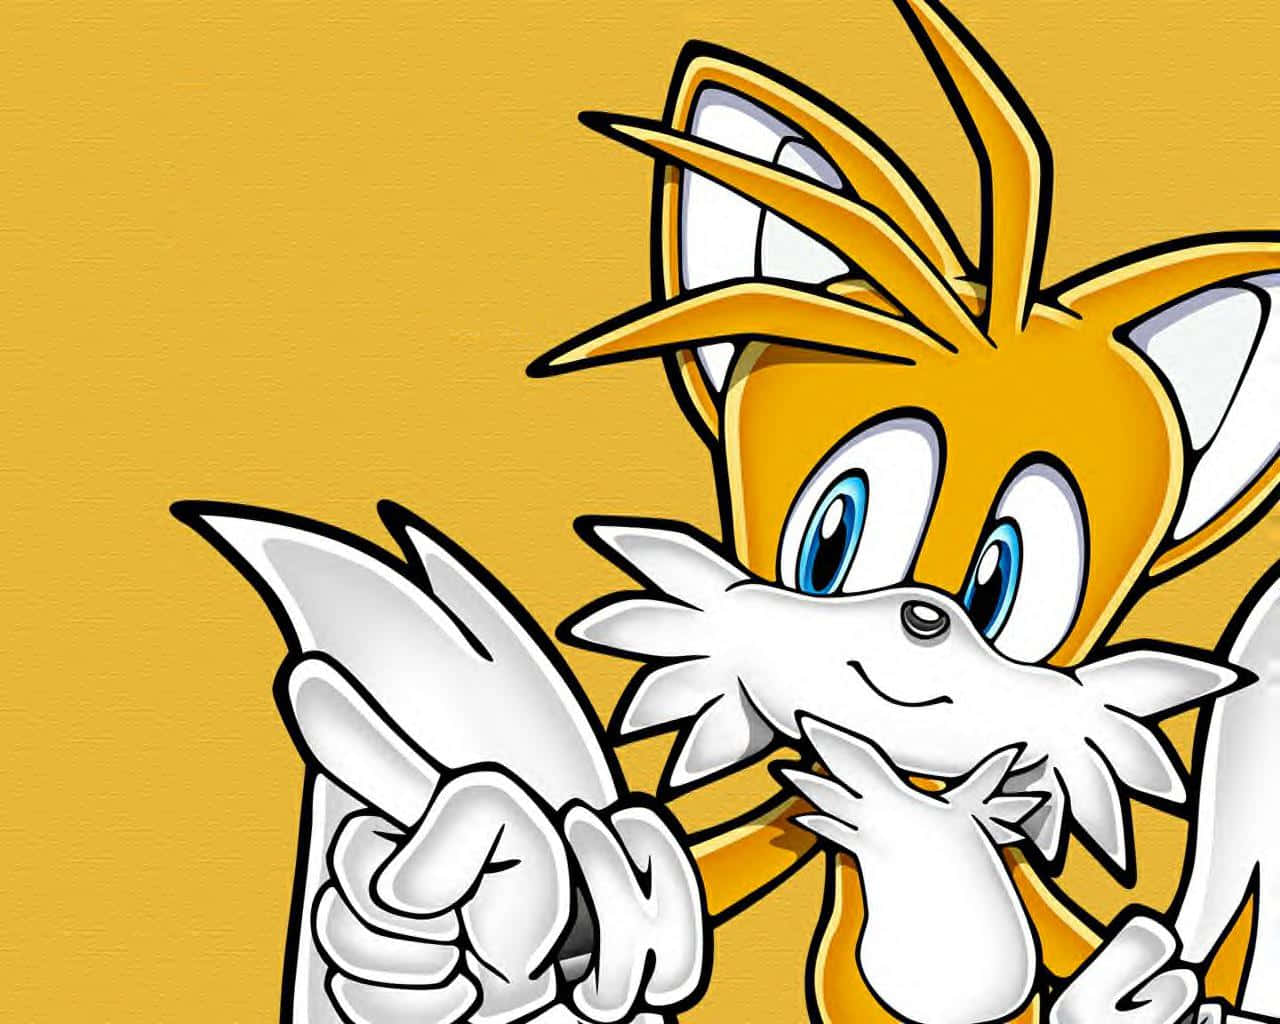  Tails Wallpaper   Cute wallpapers Wallpaper Sonic the hedgehog